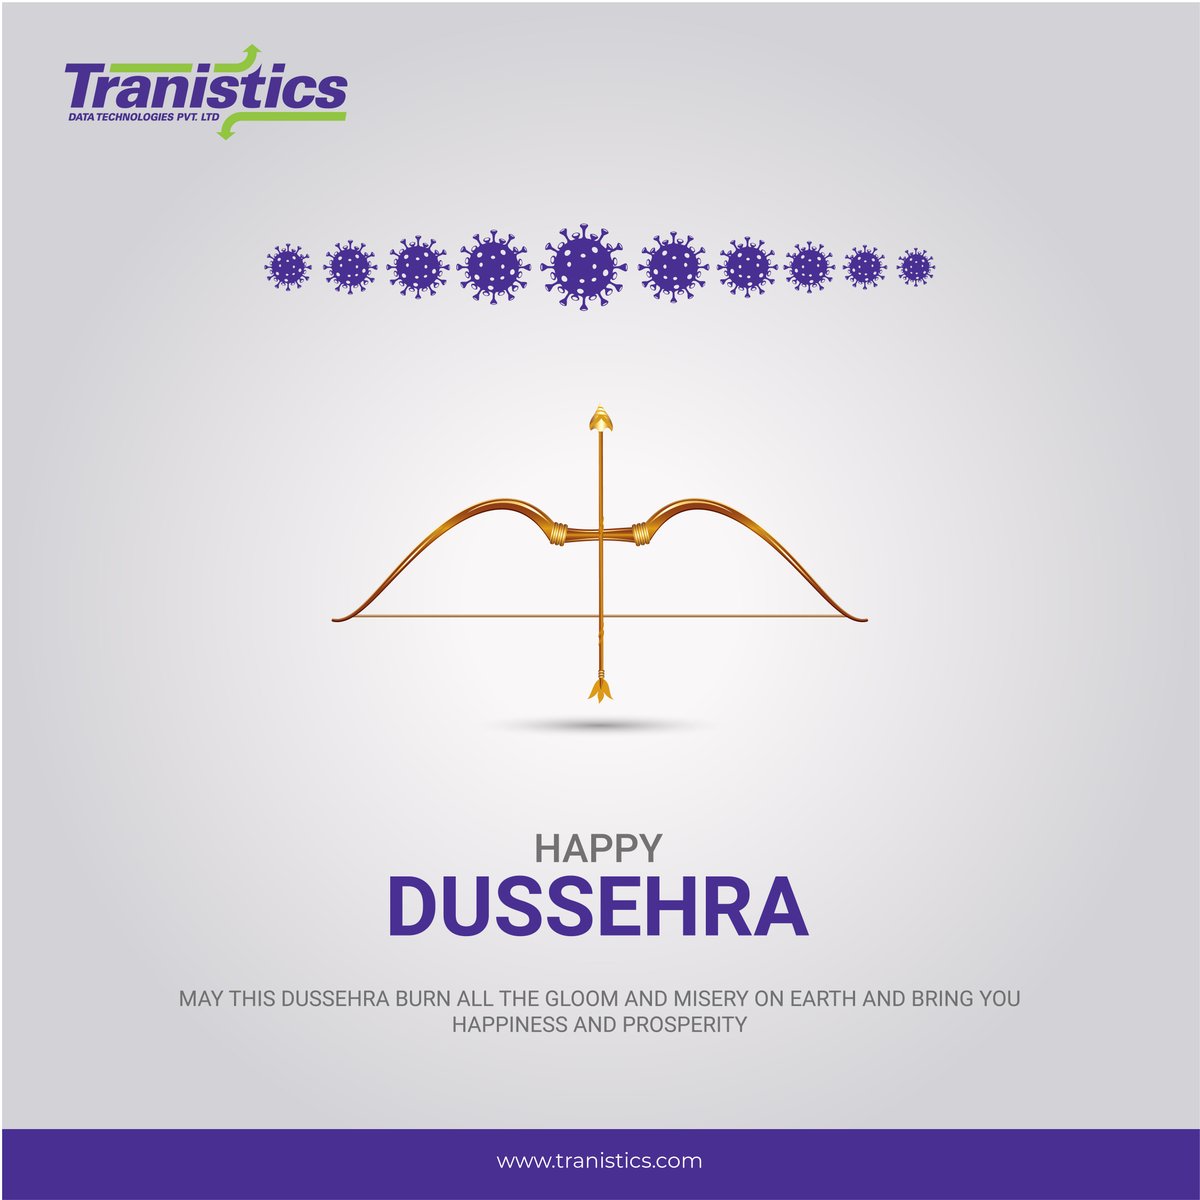 Celebrate the victory of goodness over evil this #Dussera! Let's all honor Rama's triumph over Ravana by cherishing time spent with family and loved ones.  #Tranistics #trustedbusinesspartner #logistics #publishing